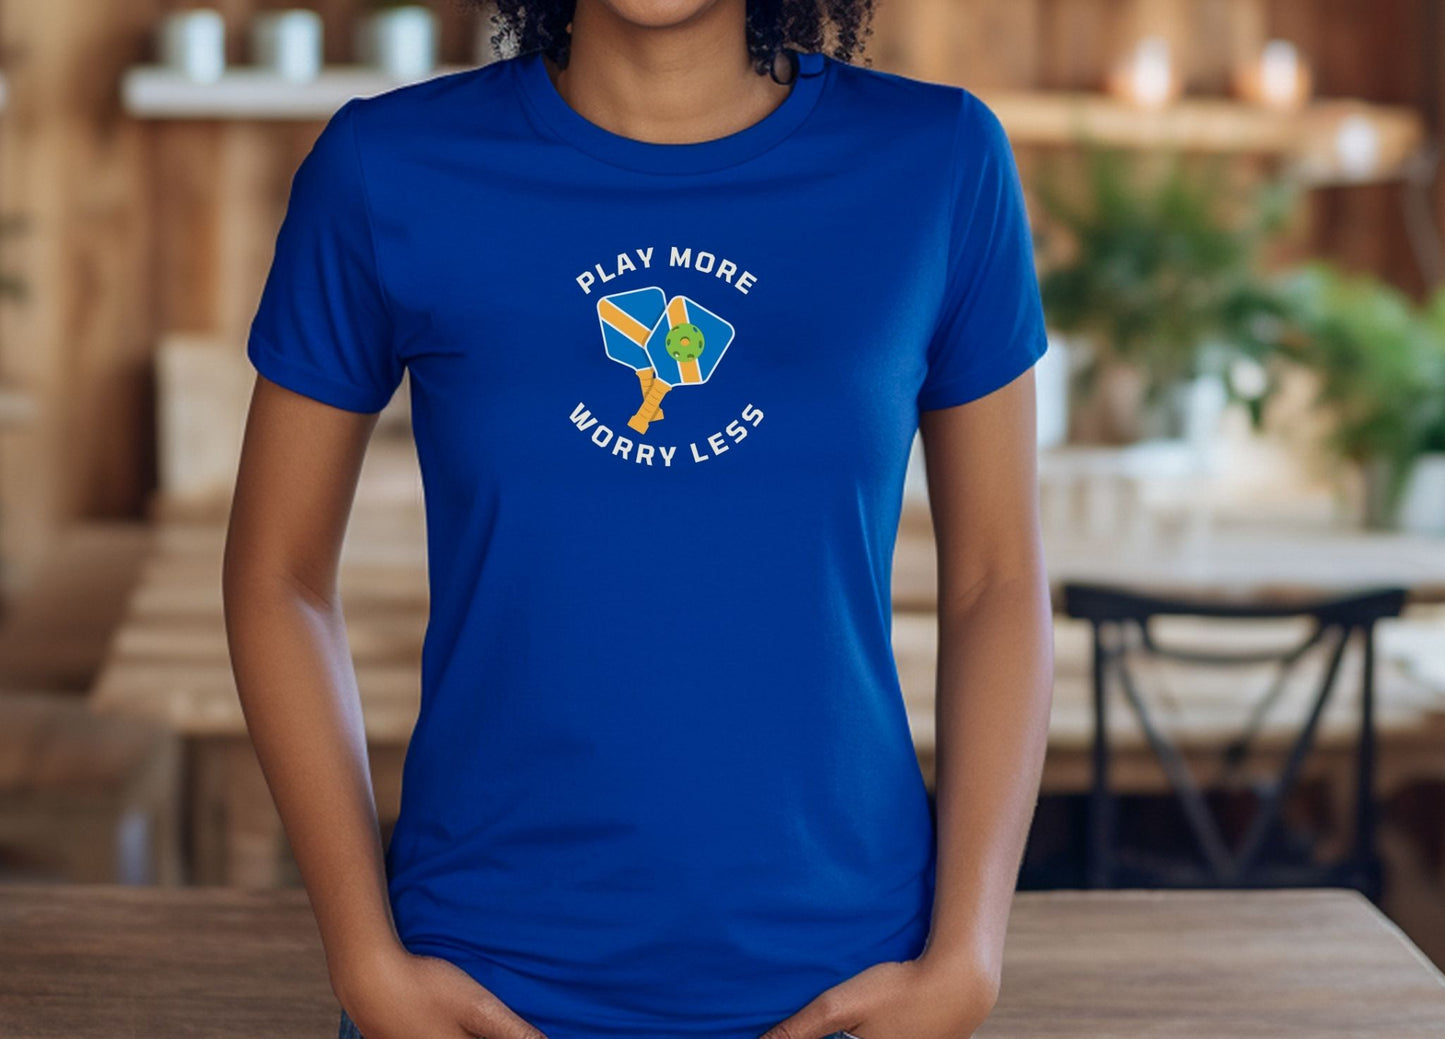 Play More (Pickleball) Worry Less T-shirt!